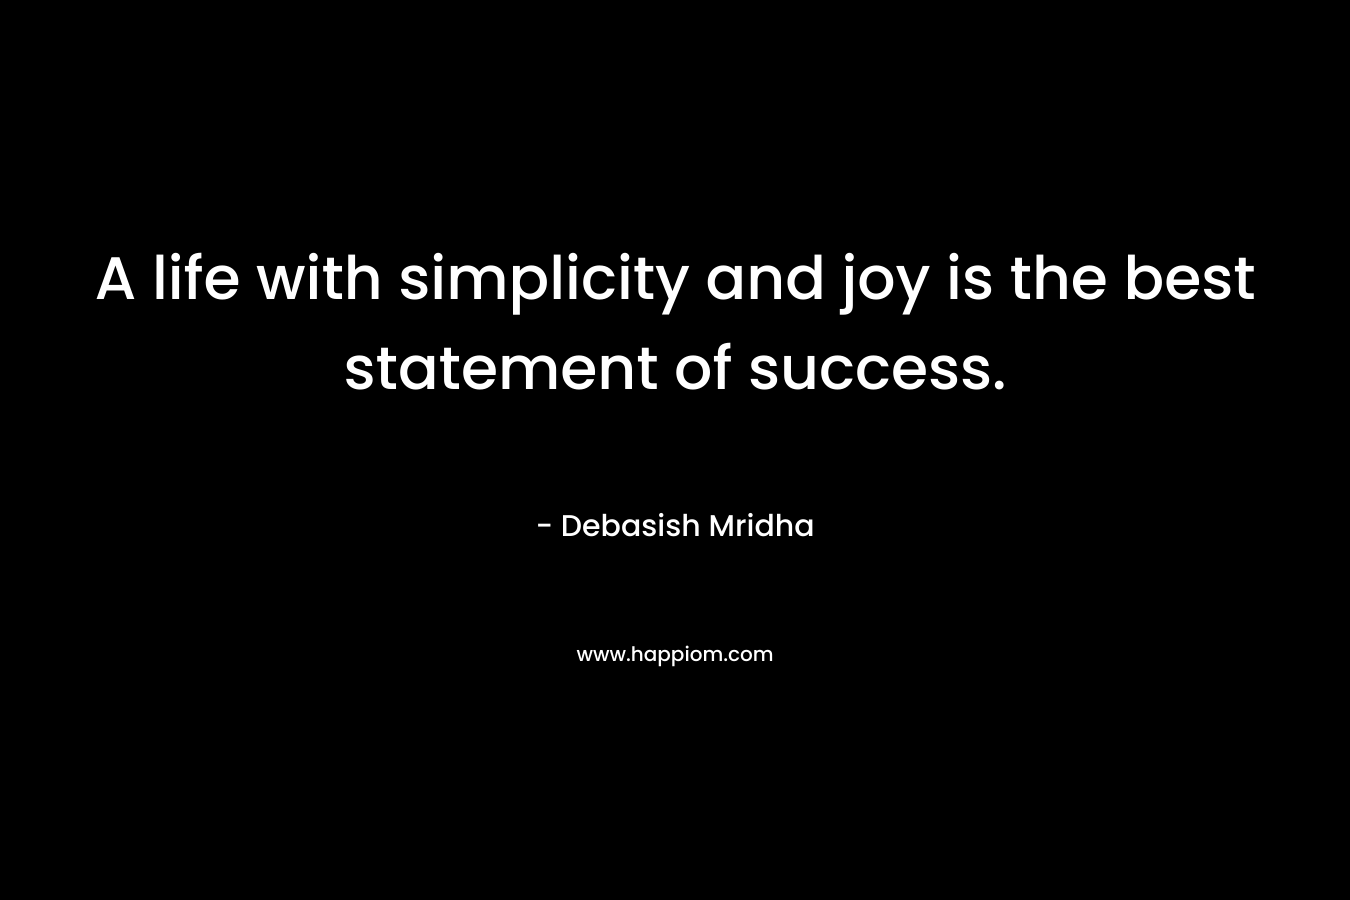 A life with simplicity and joy is the best statement of success.